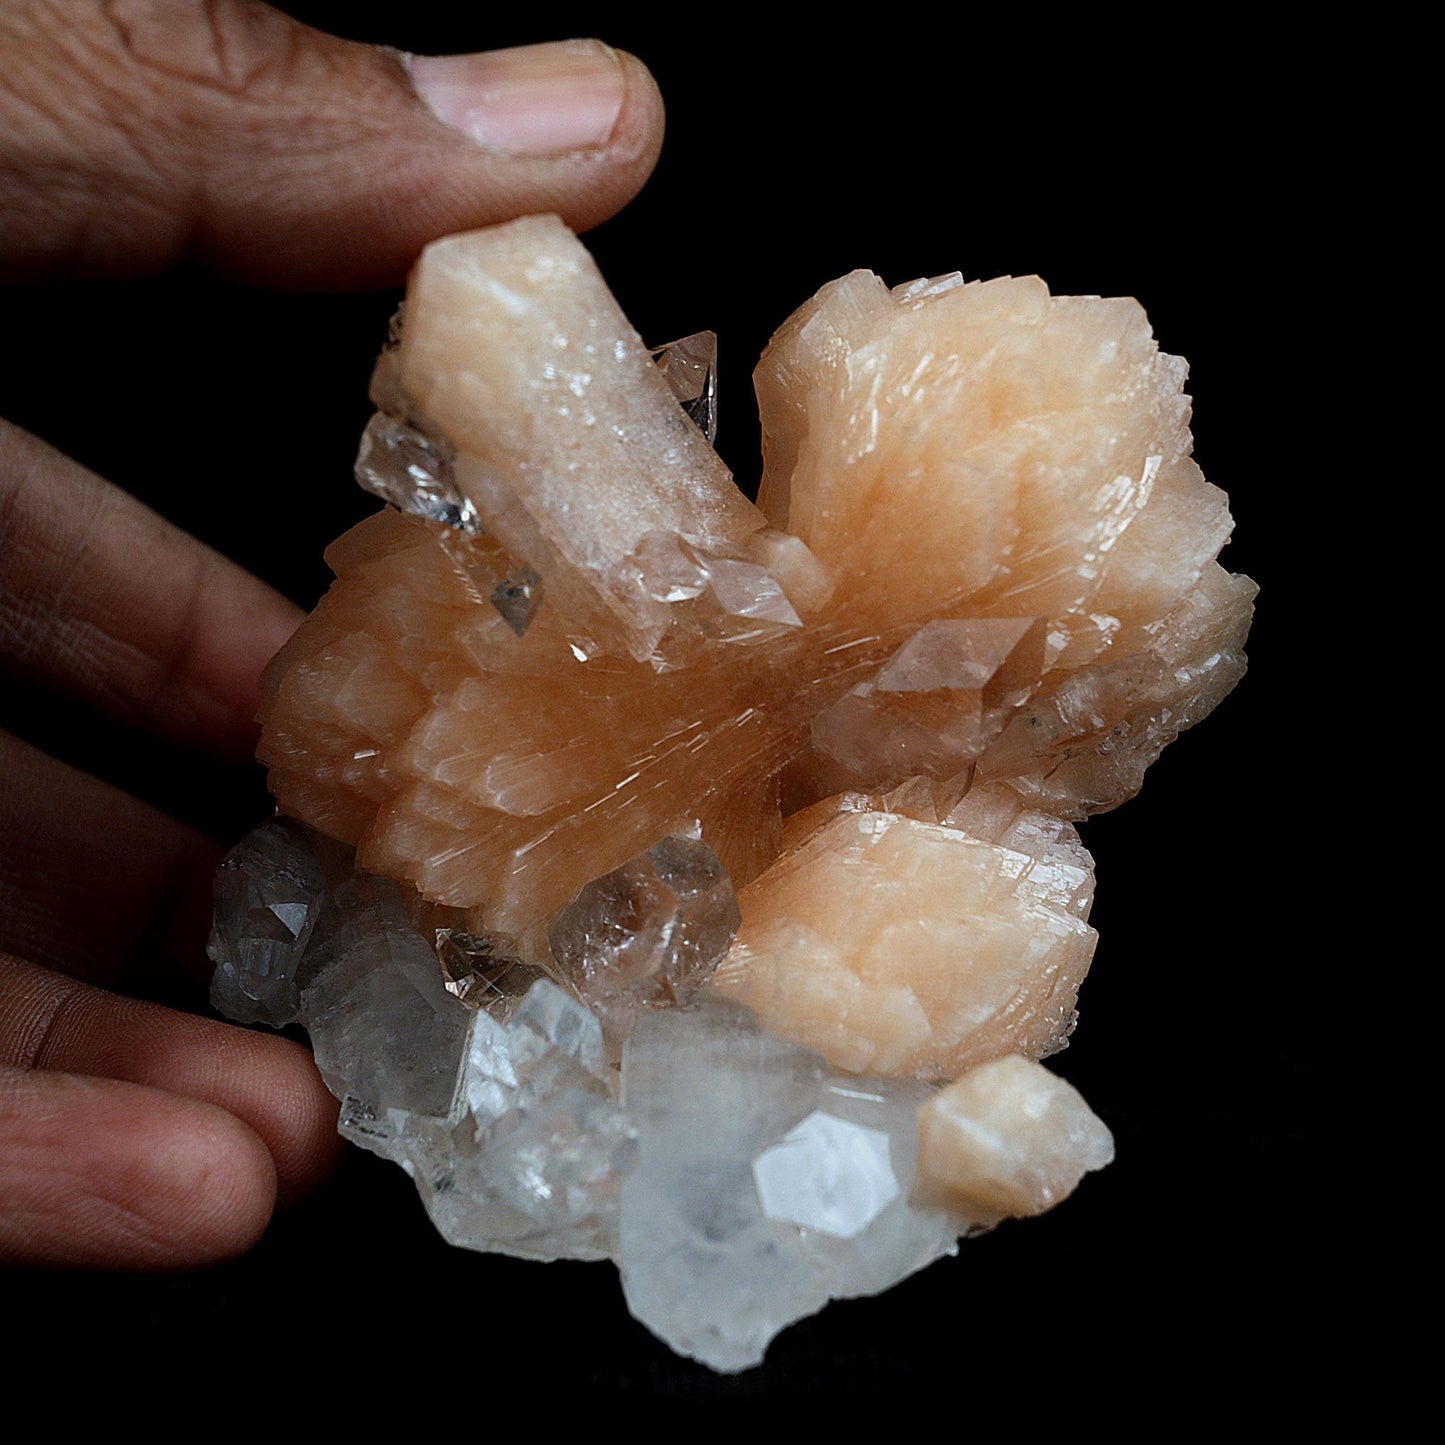 Perfect Bow Stilbite with Apophyllite Natural Mineral Specimen # B 406…  https://www.superbminerals.us/products/perfect-bow-stilbite-with-apophyllite-natural-mineral-specimen-b-4060  Features:A very large cluster of lustrous, water-clear Apopyllite crystals (up to 6.5 cm), many doubly terminated, hosting a big peach-colored bow shape Stilbite. But what really sets this piece apart is the pristine, translucent, peach-colored bow-tie Stilbite crystal that rises from center of the Apophyllite cluster